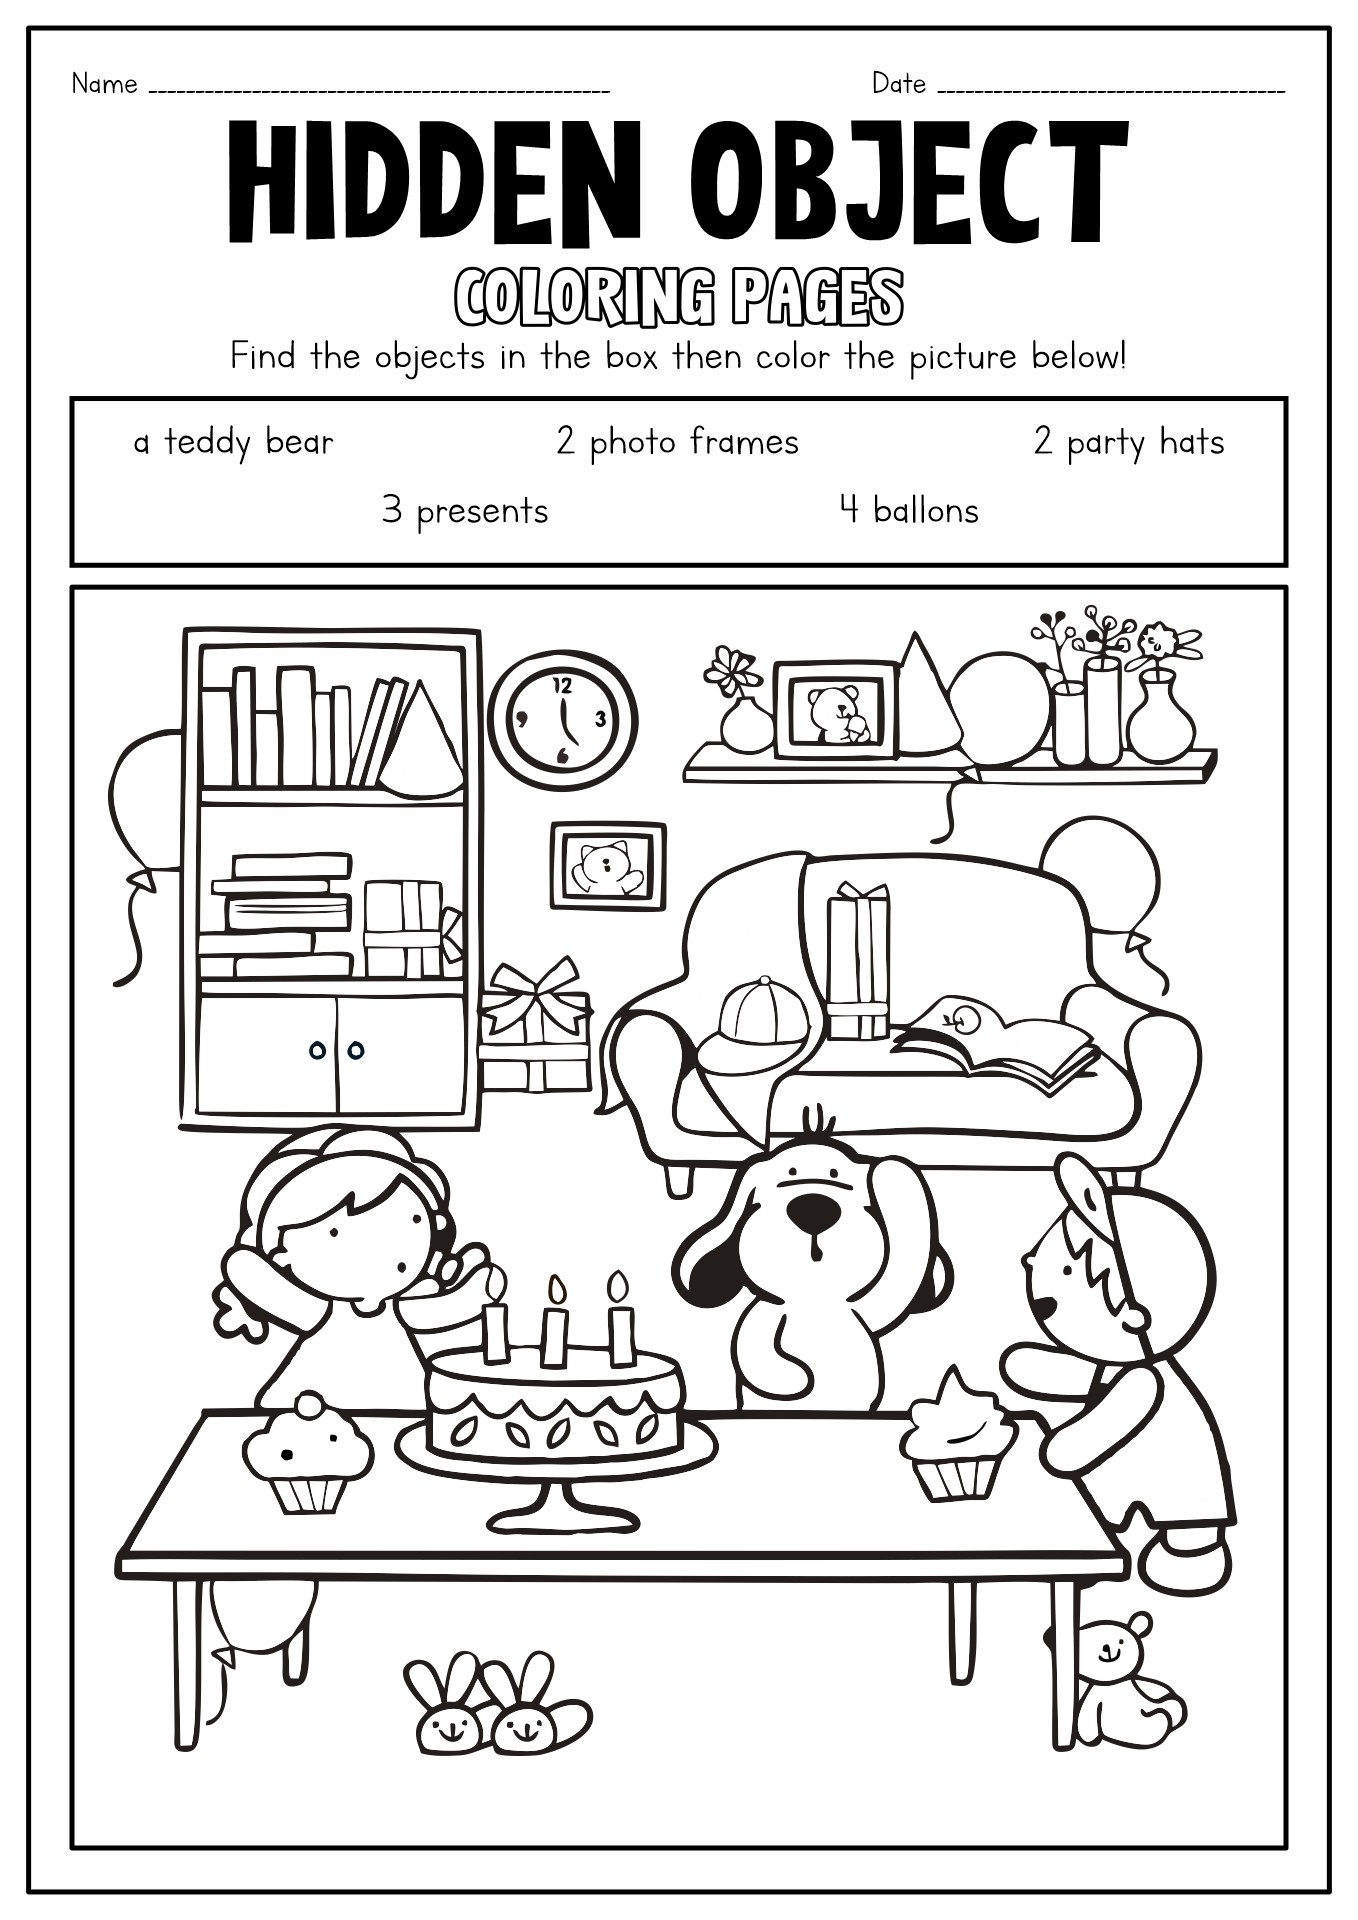 Hidden Object Coloring Pages Image